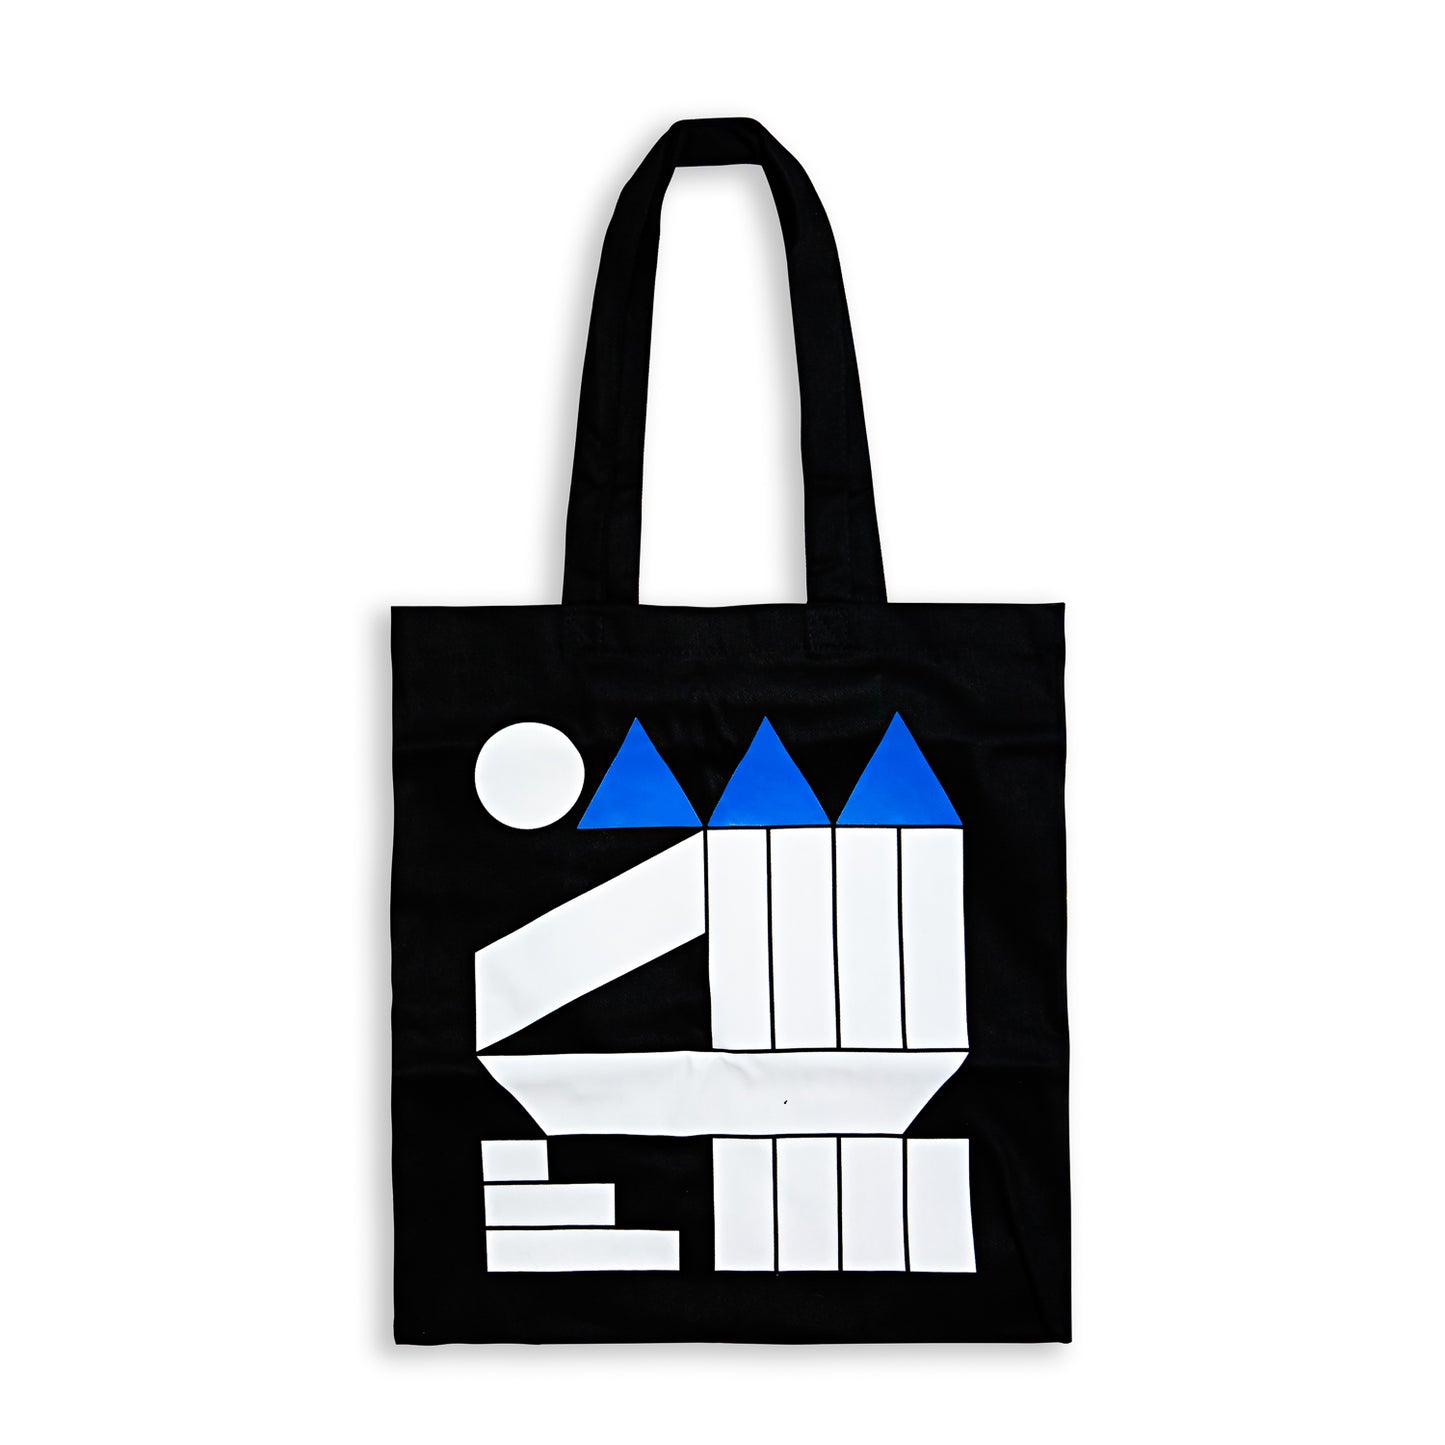 Hayward Gallery tote bag with geometric white and blue shapes